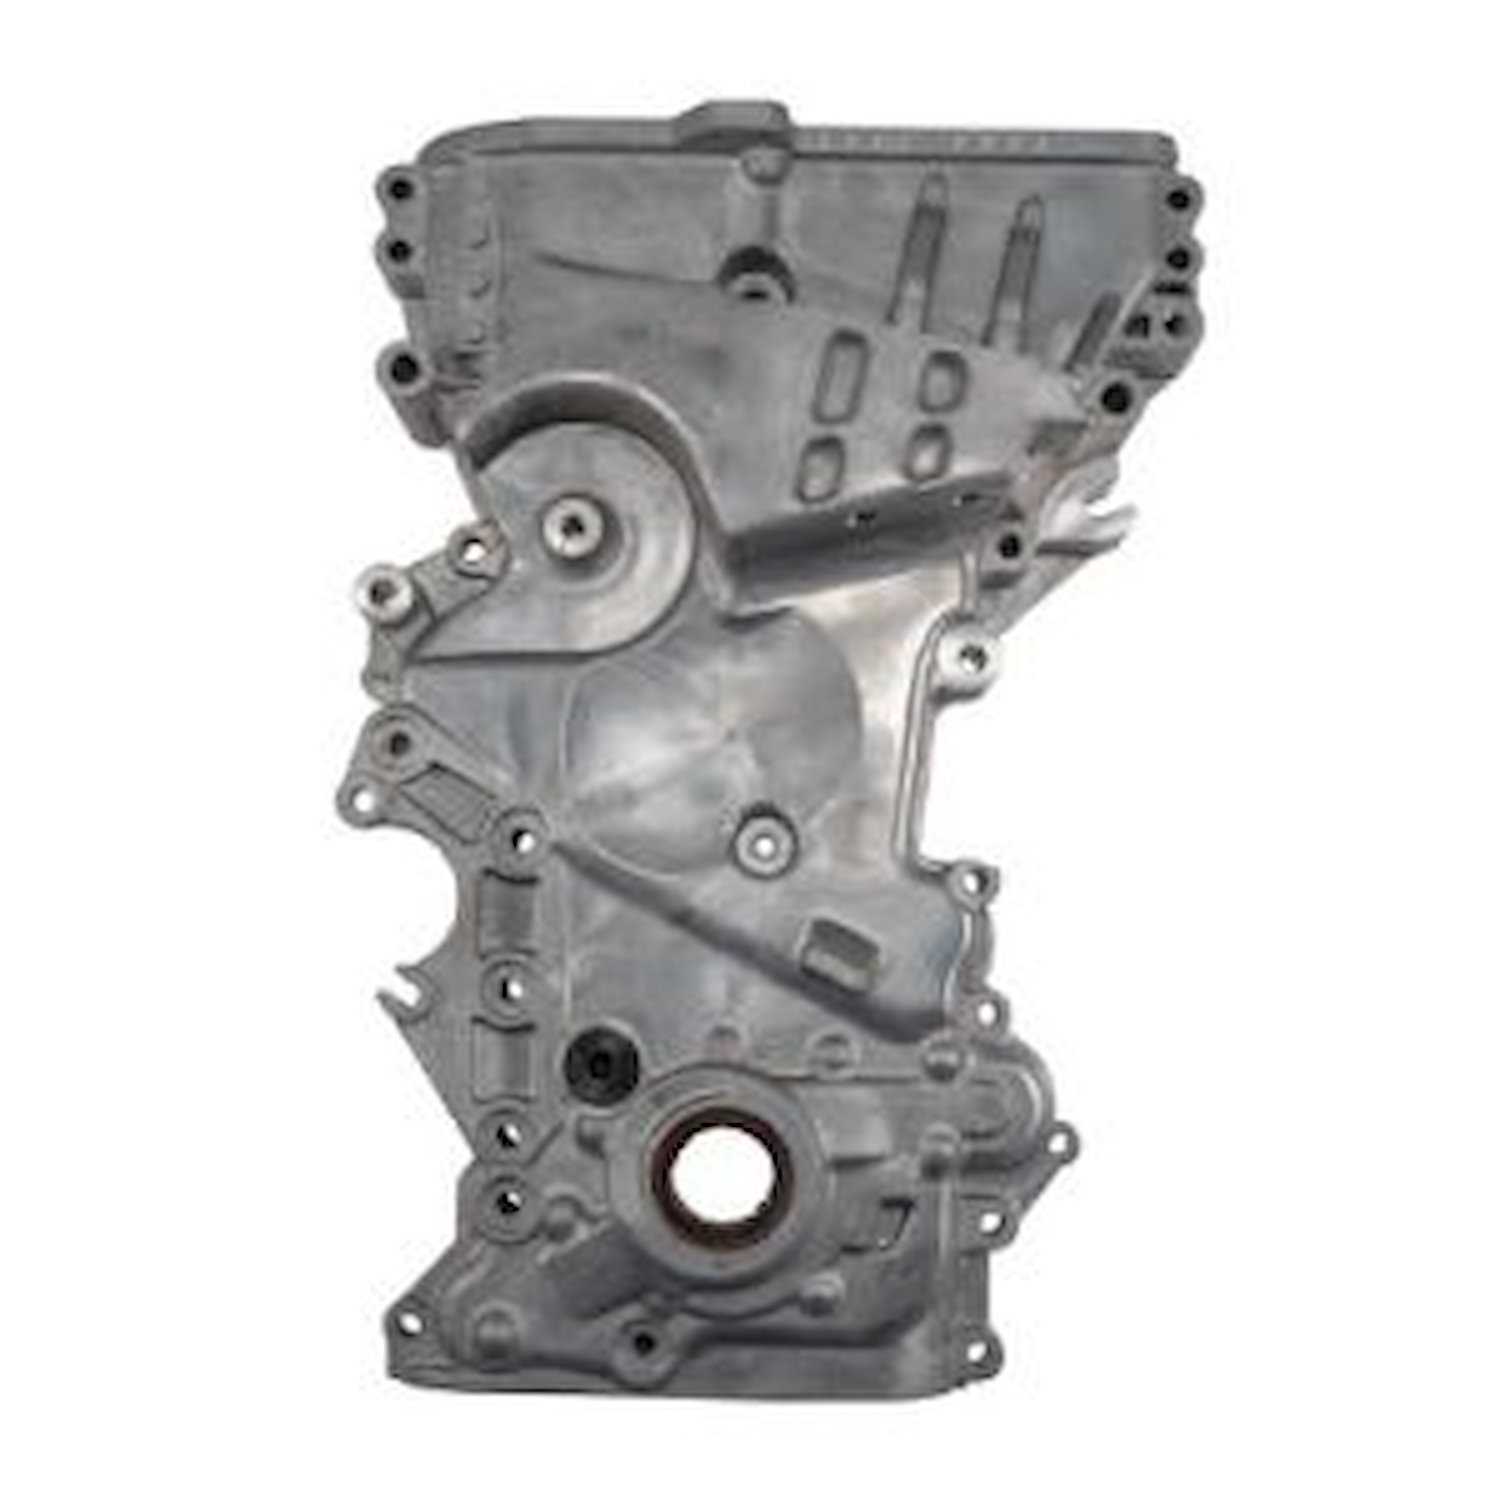 Oil Pump and Timing Cover Assembly Fits Select 2012-2014 Kia 1.8L/2.0L Engines [Engine VIN Code 6, 8]